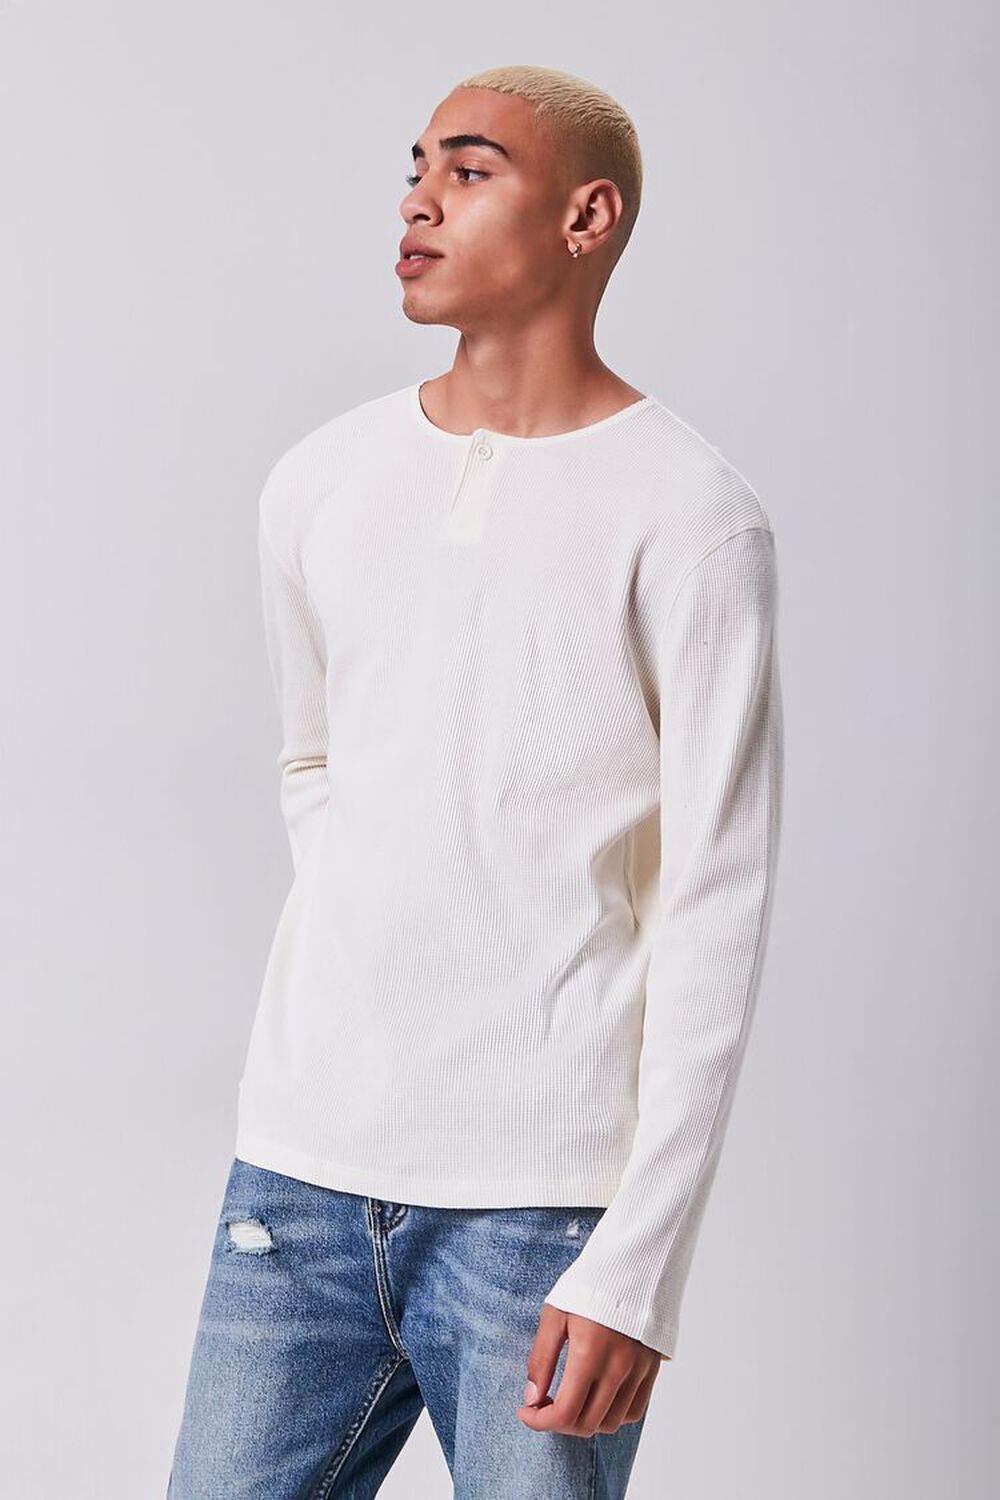 CREAM Henley Thermal Top, image 1